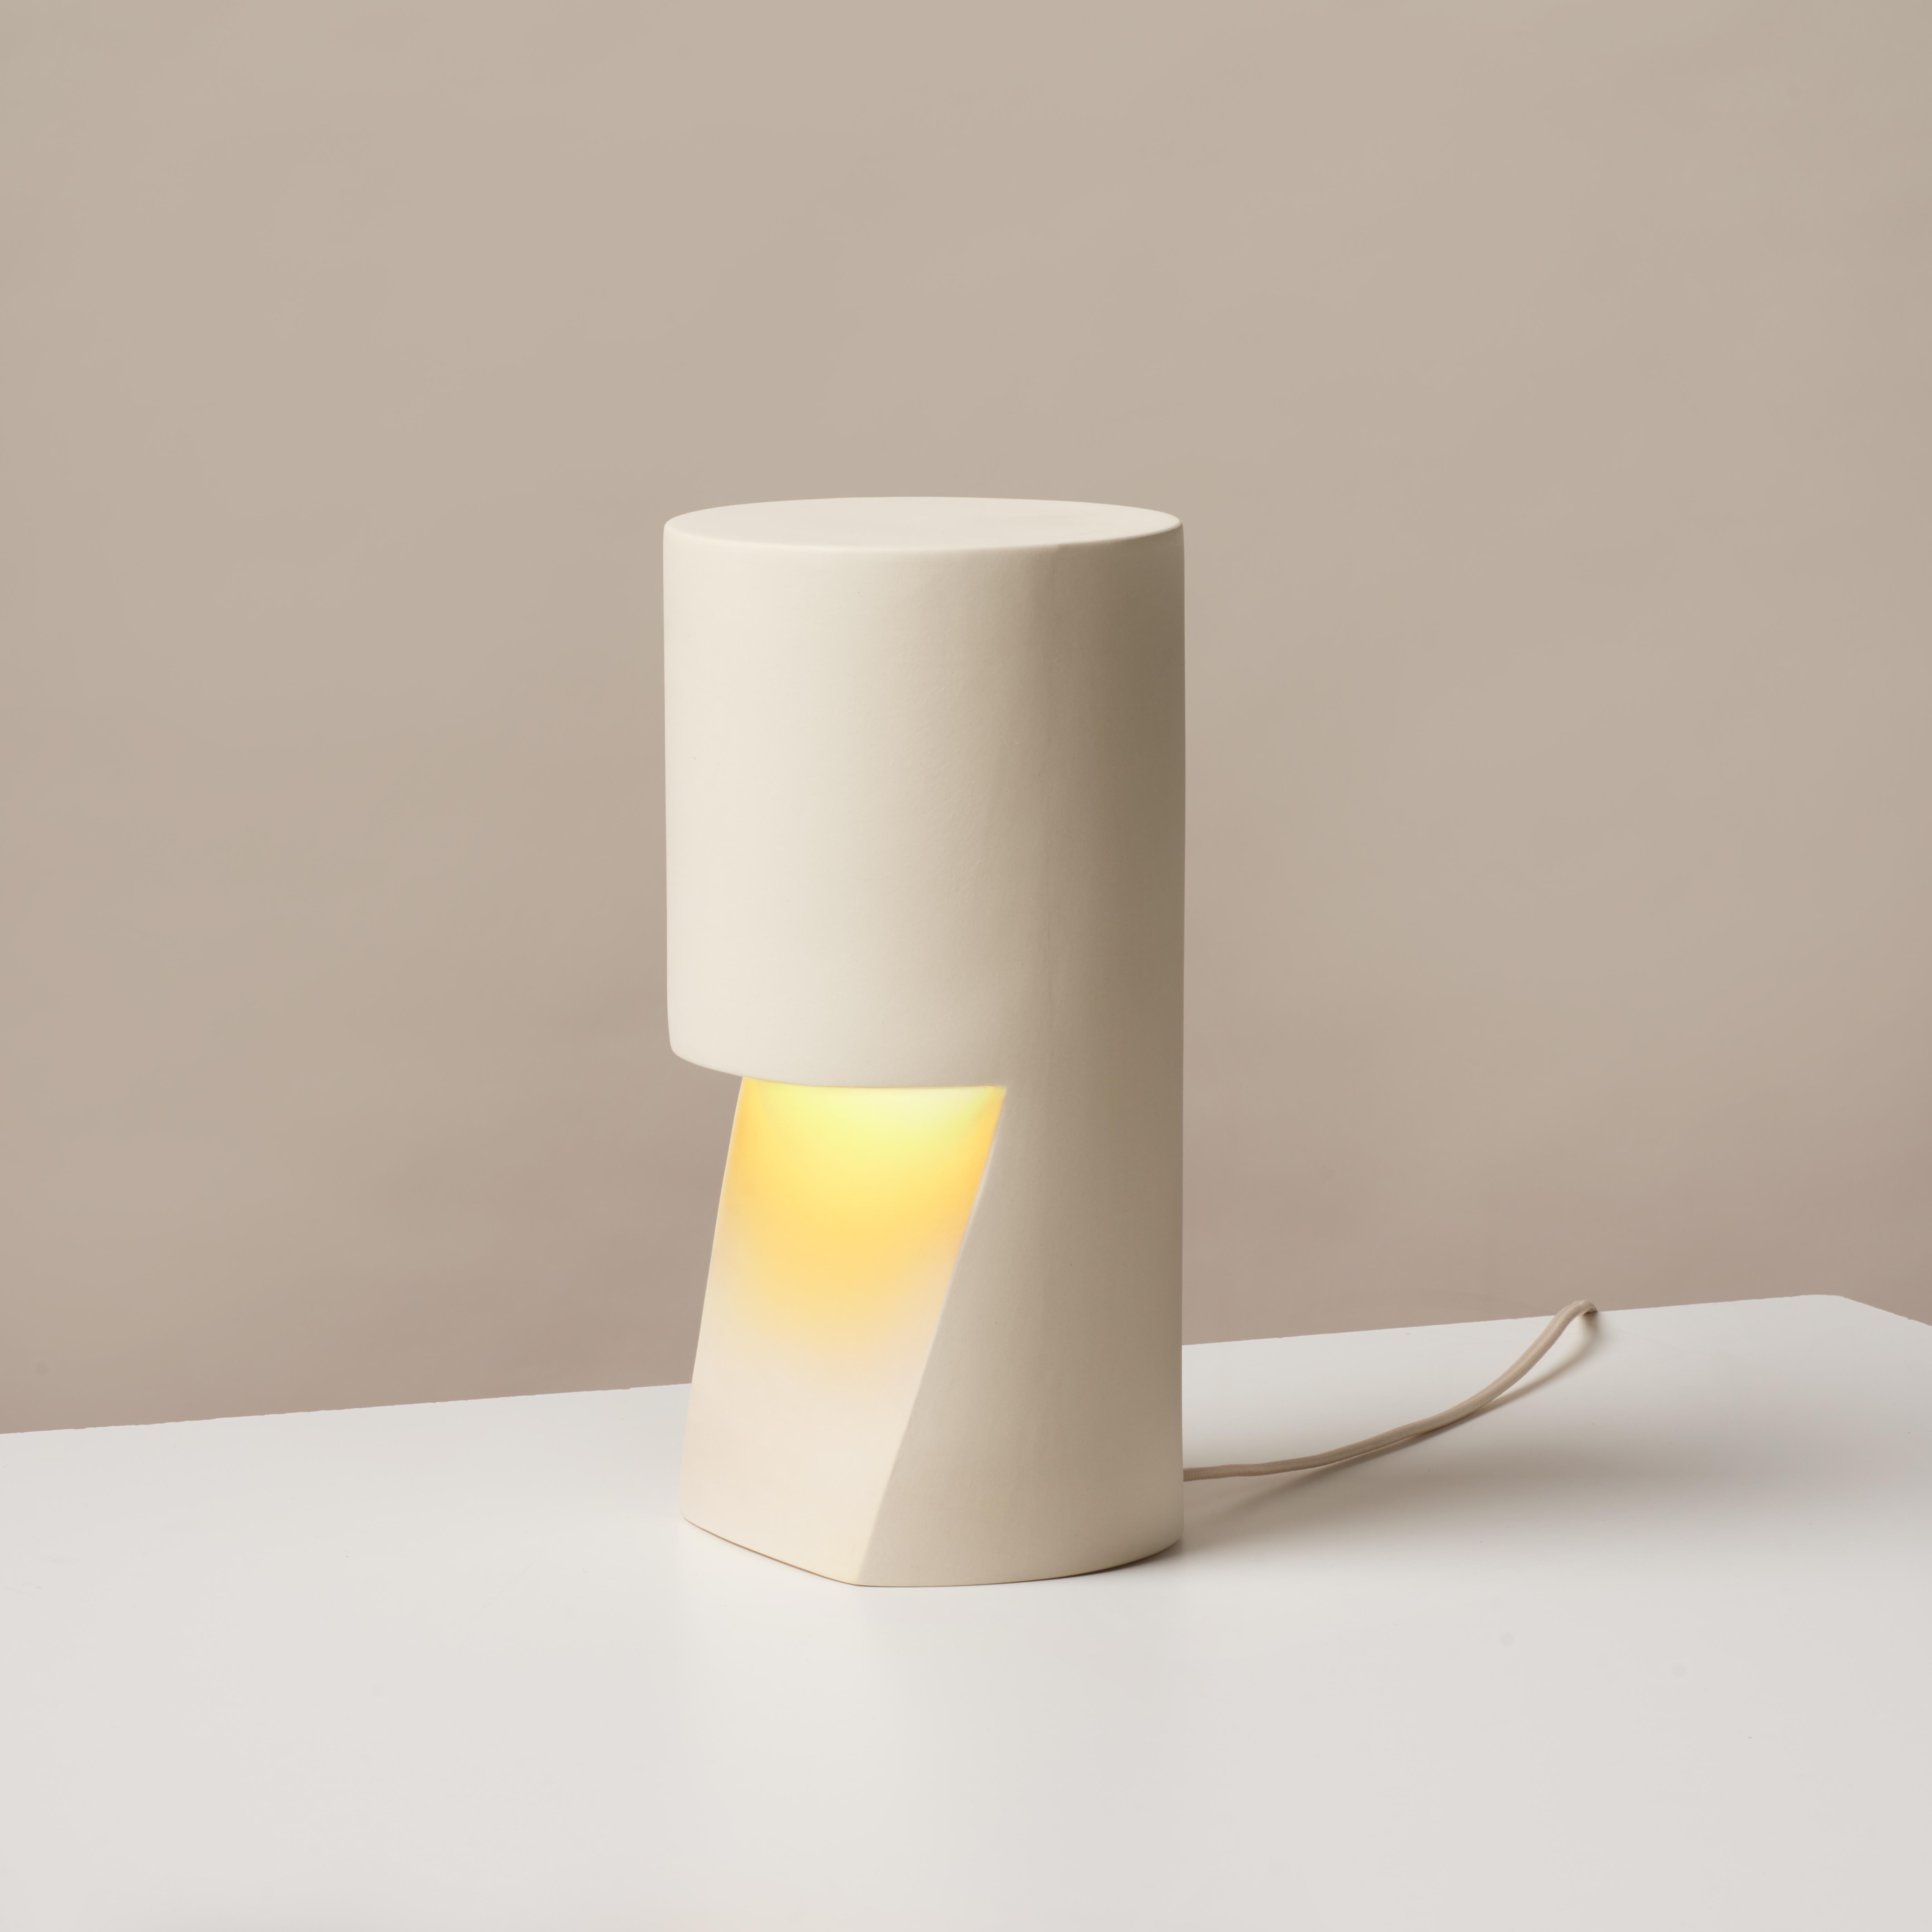 Pillar light by Dust and Form
Dimensions: D 15.2 x 29.2 H cm
Materials: porcelain

Origin Form Collection in three finishes: Hand-sanded (our classic, smooth, bare finish) Ivory (satin white glaze) Charcoal (matte black glaze).

Hand sanded